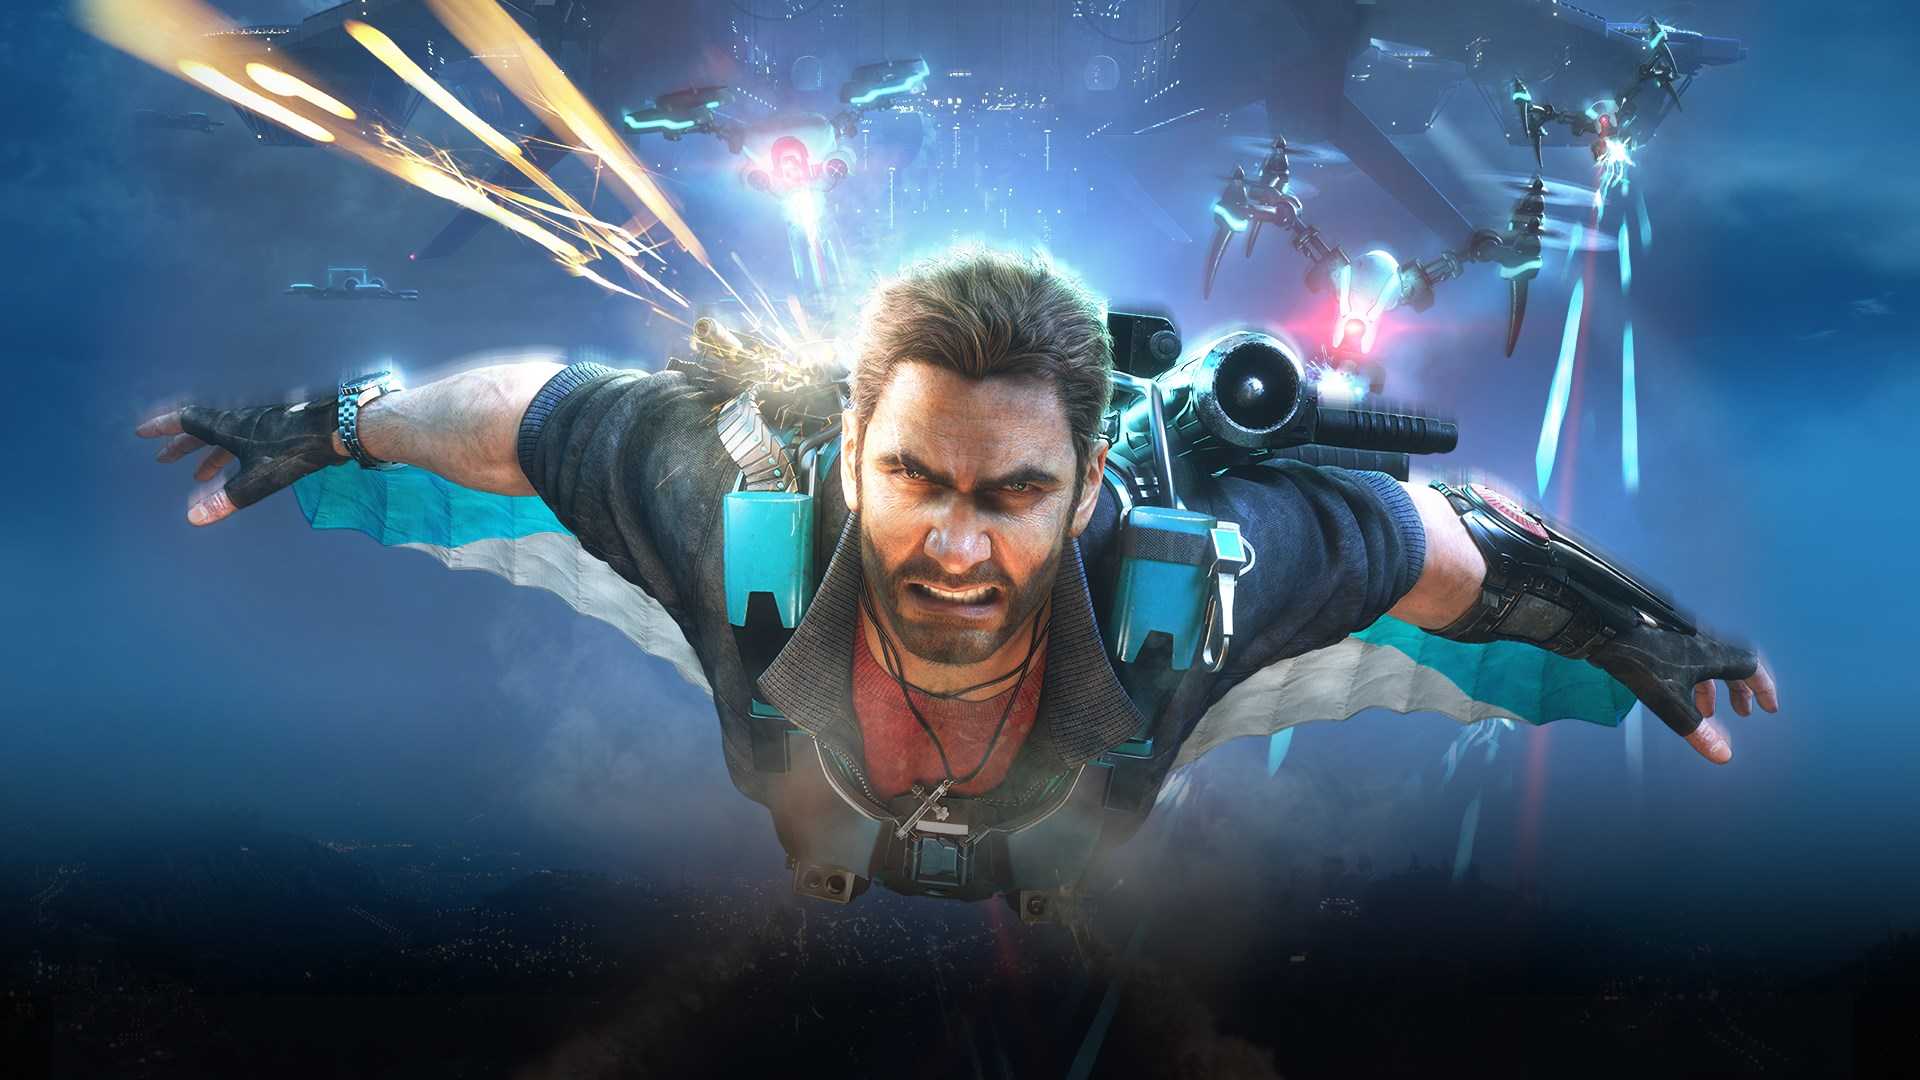 just cause 3 reset bases